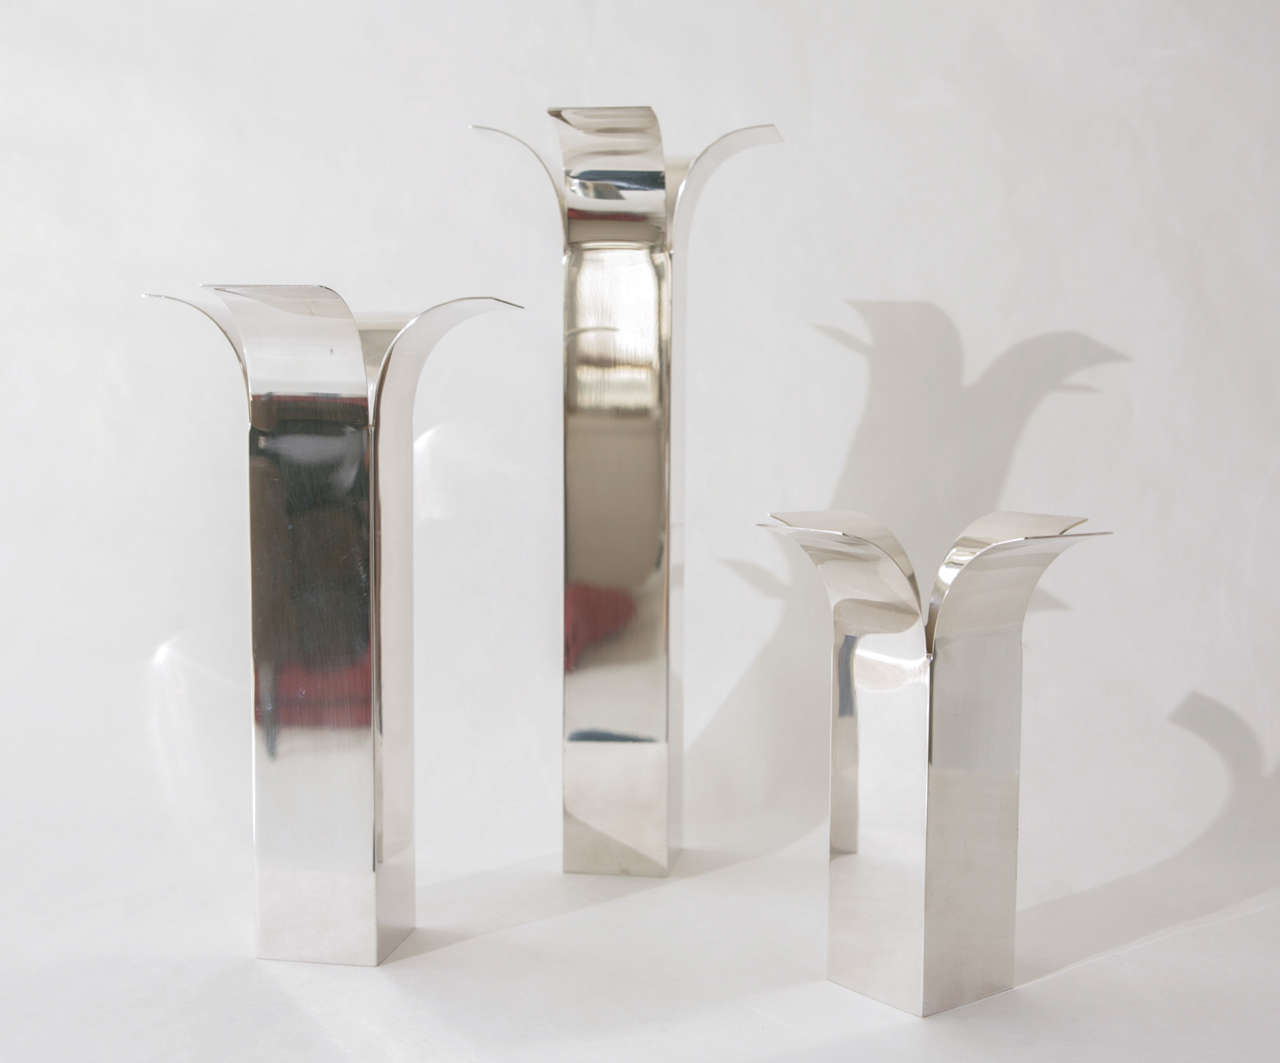  Silver Plated Candleholders/Vases by Sabattini 1